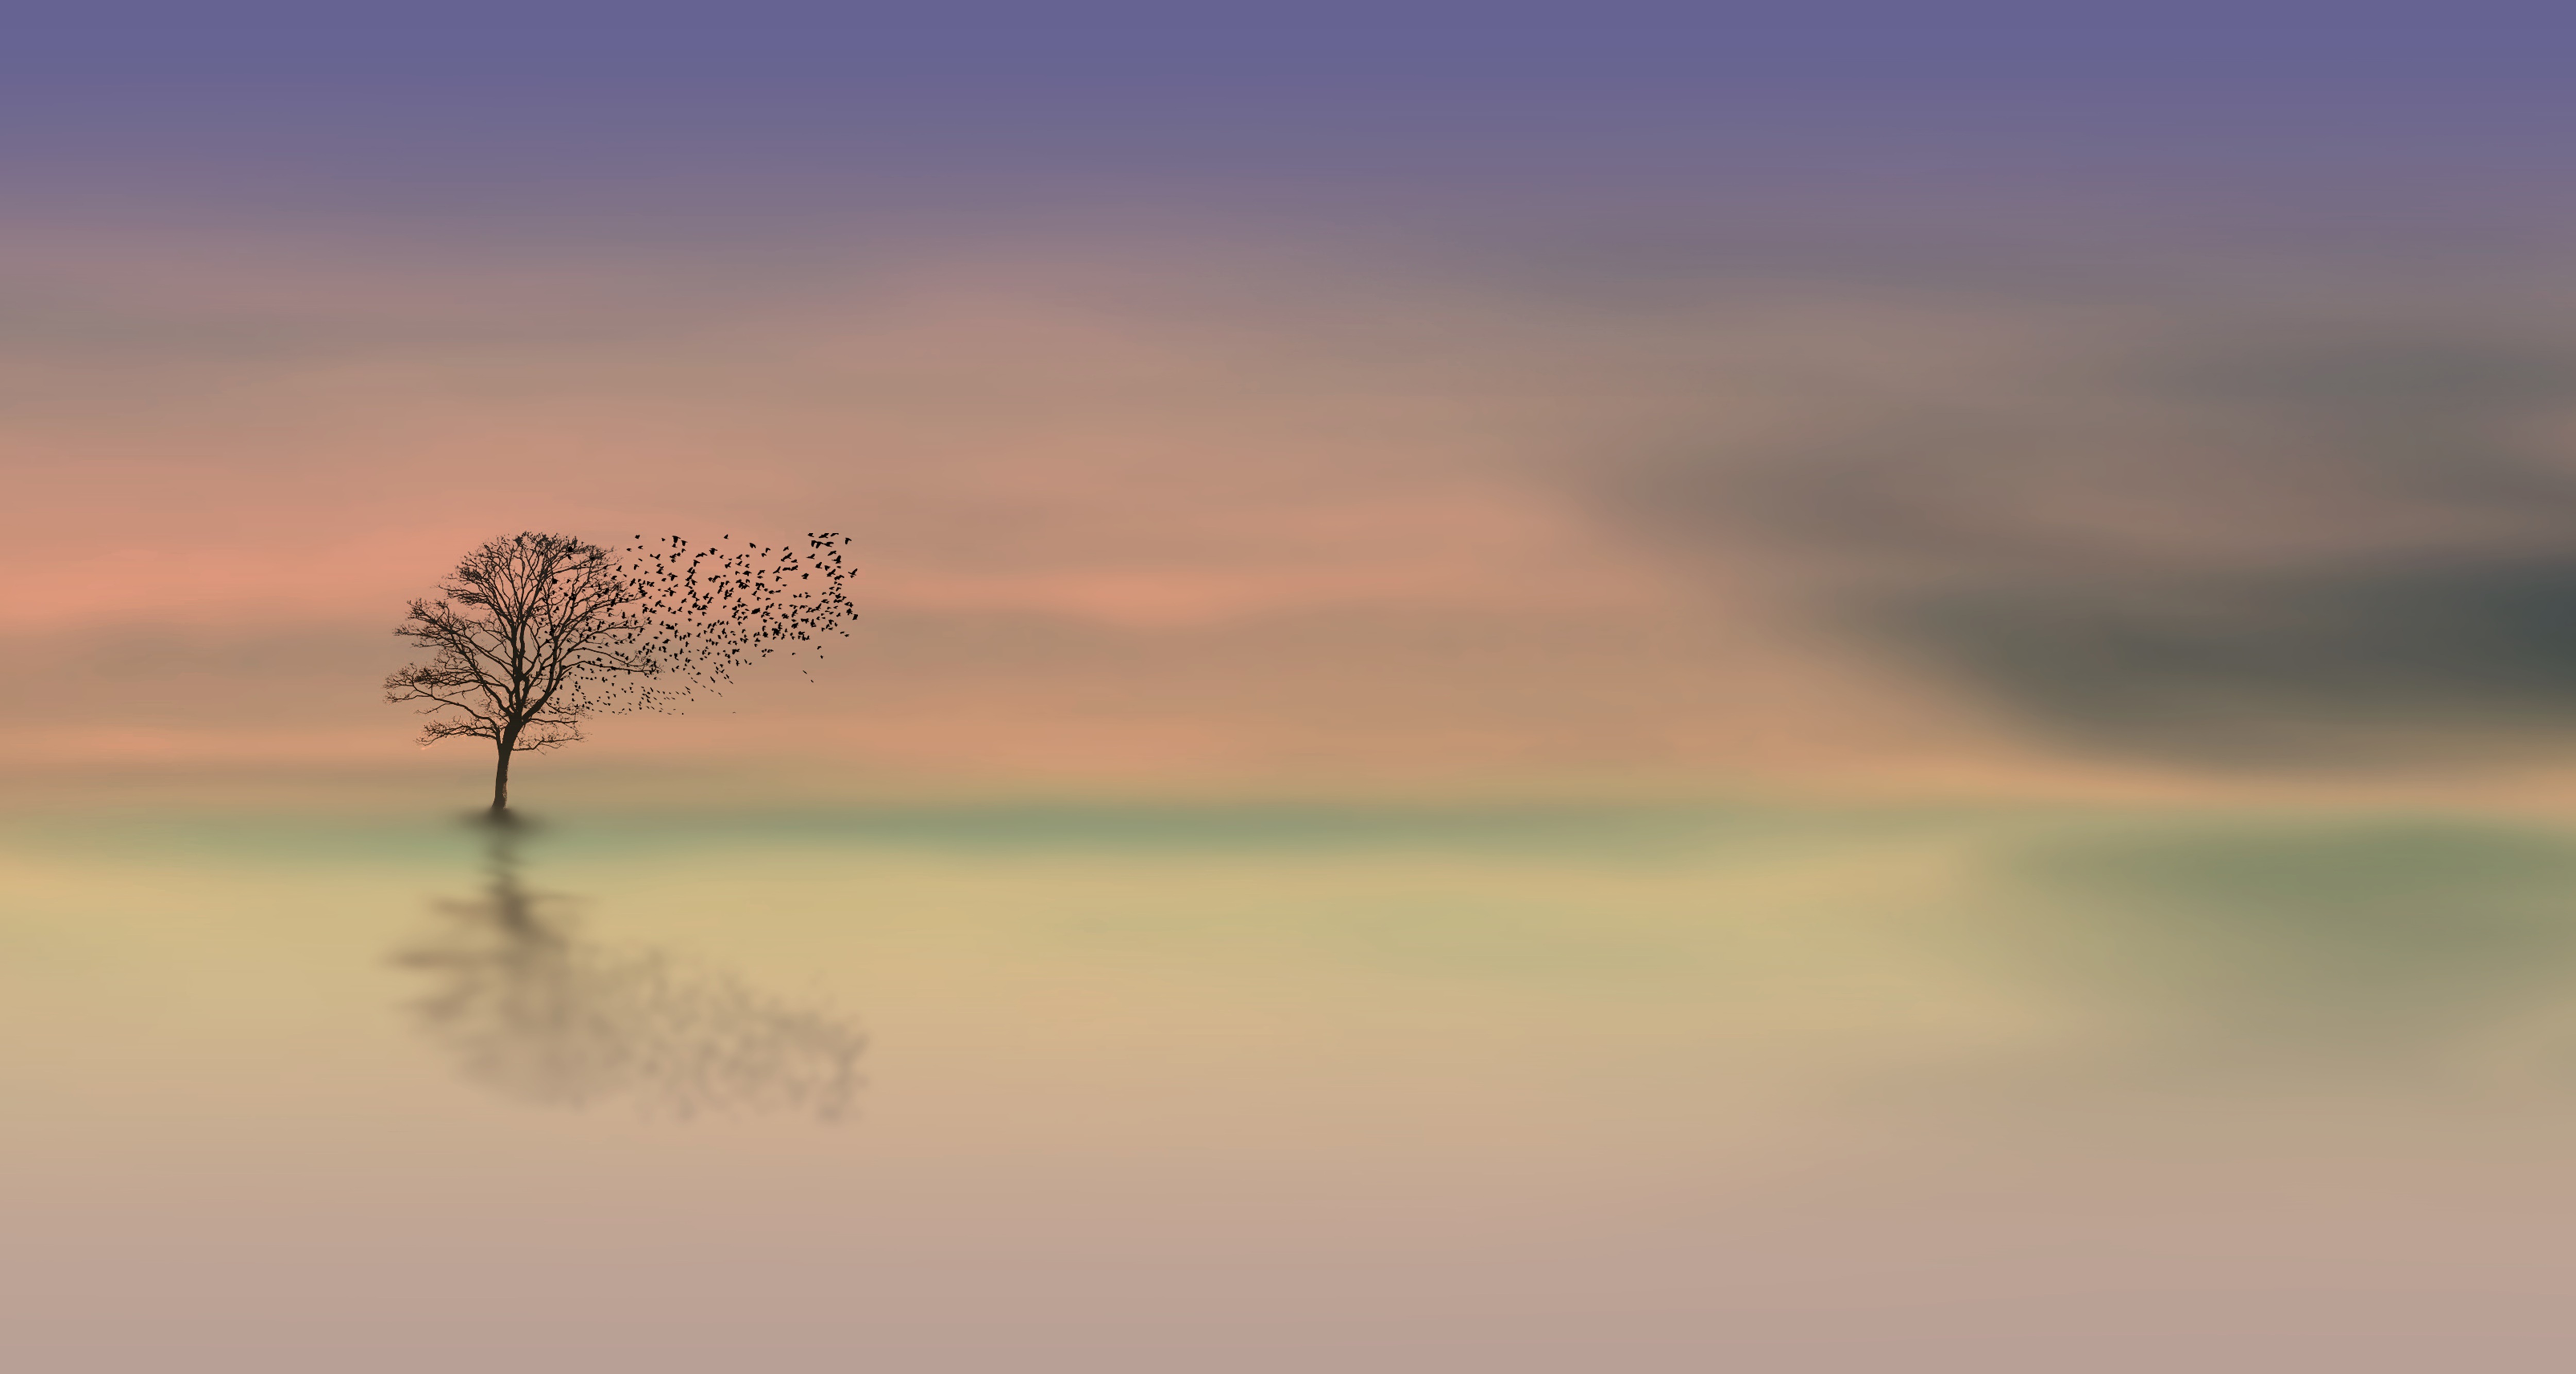 52245 download wallpaper dawn, horizon, wood, tree, minimalism, alone, lonely screensavers and pictures for free